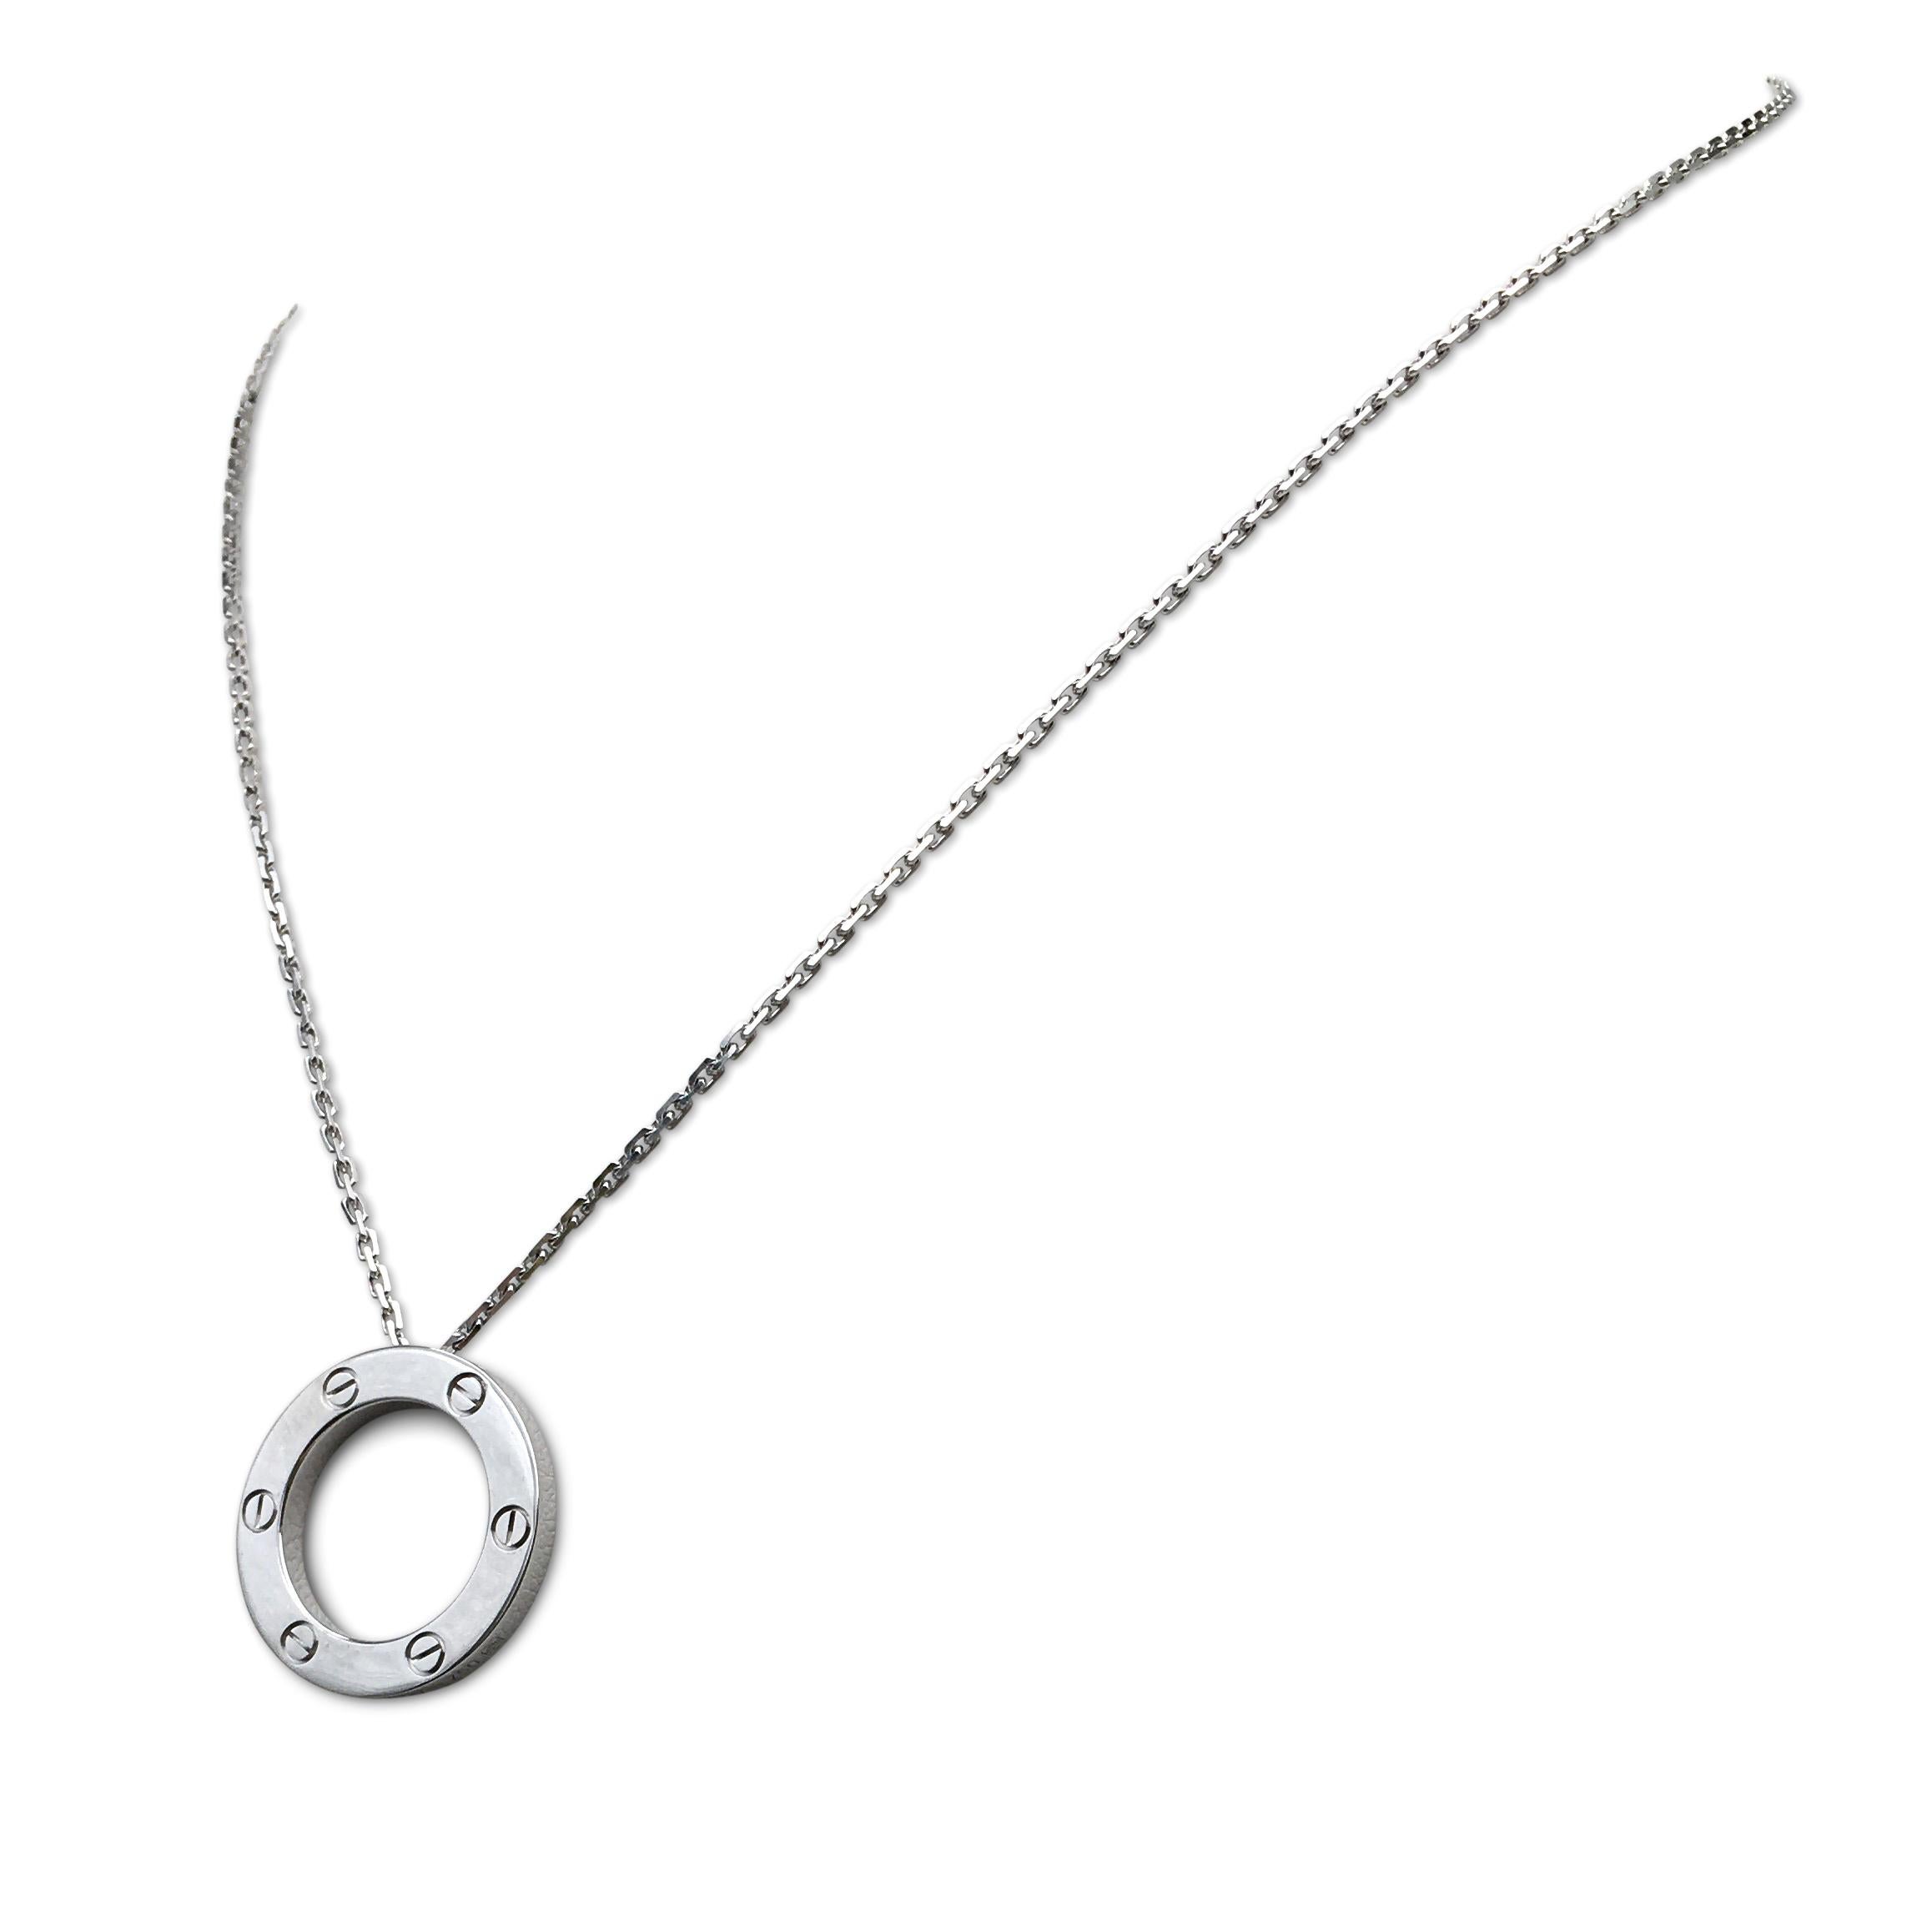 Authentic Cartier Love pendant necklace crafted in 18 karat white gold. The 24 mm pendant features classic crew top motif on one side and 'LOVE' spelled out on the other. Pendant hangs from a white gold oval link chain that is 17 inches in length.